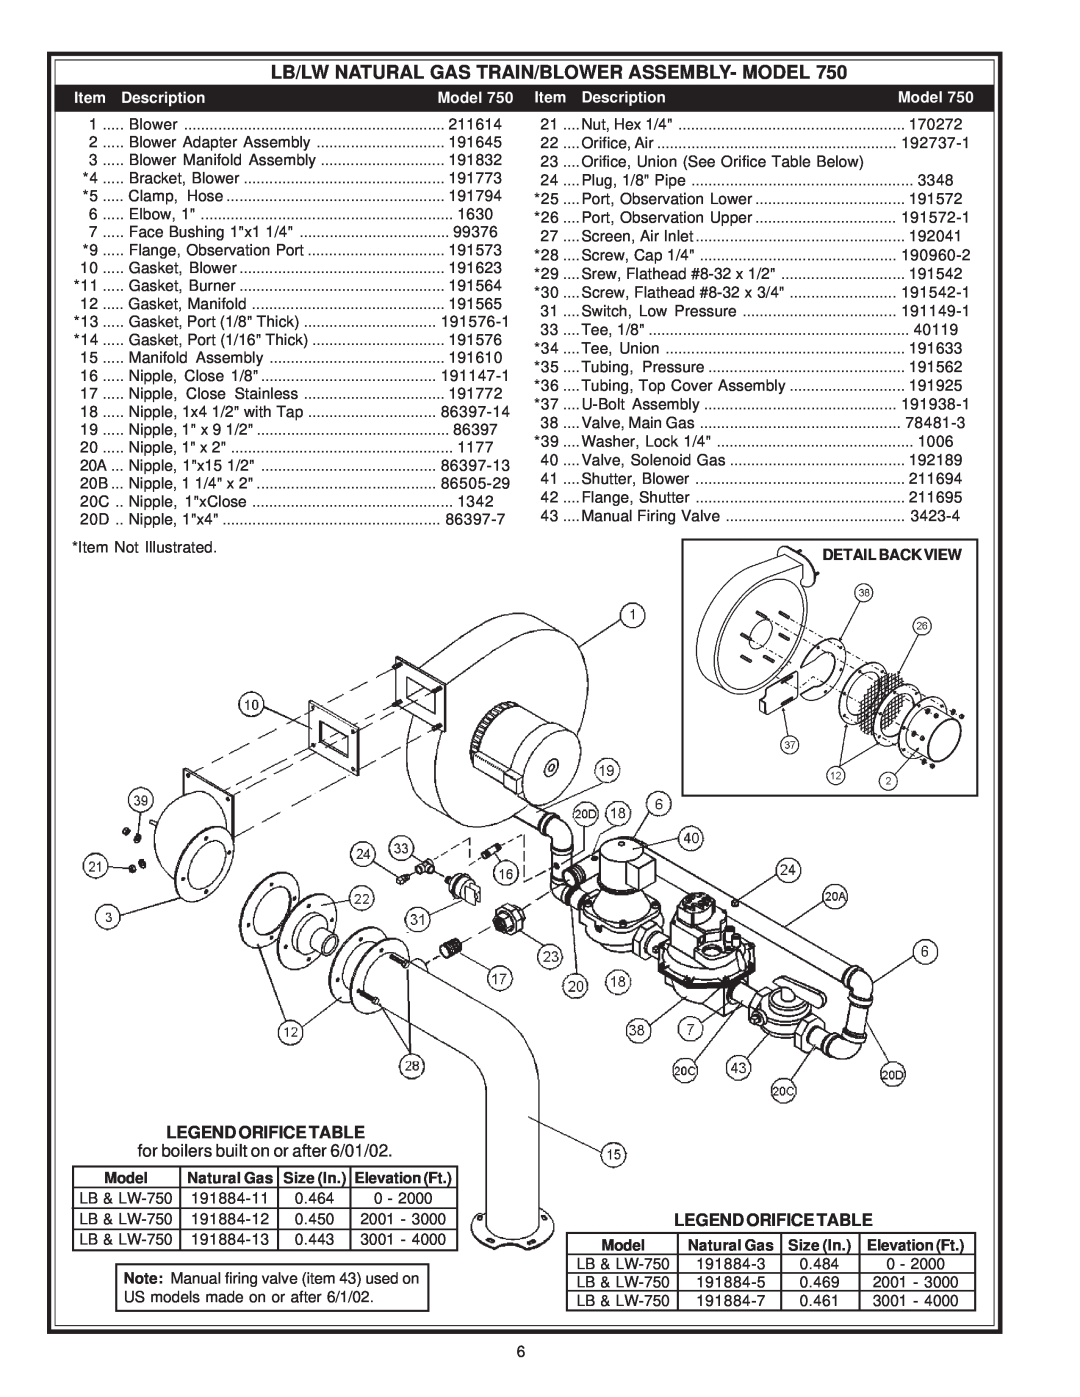 A.O. Smith LB/LW: 500, 750 & 1000 manual for boilers built on or after 6/01/02, Description, Model 